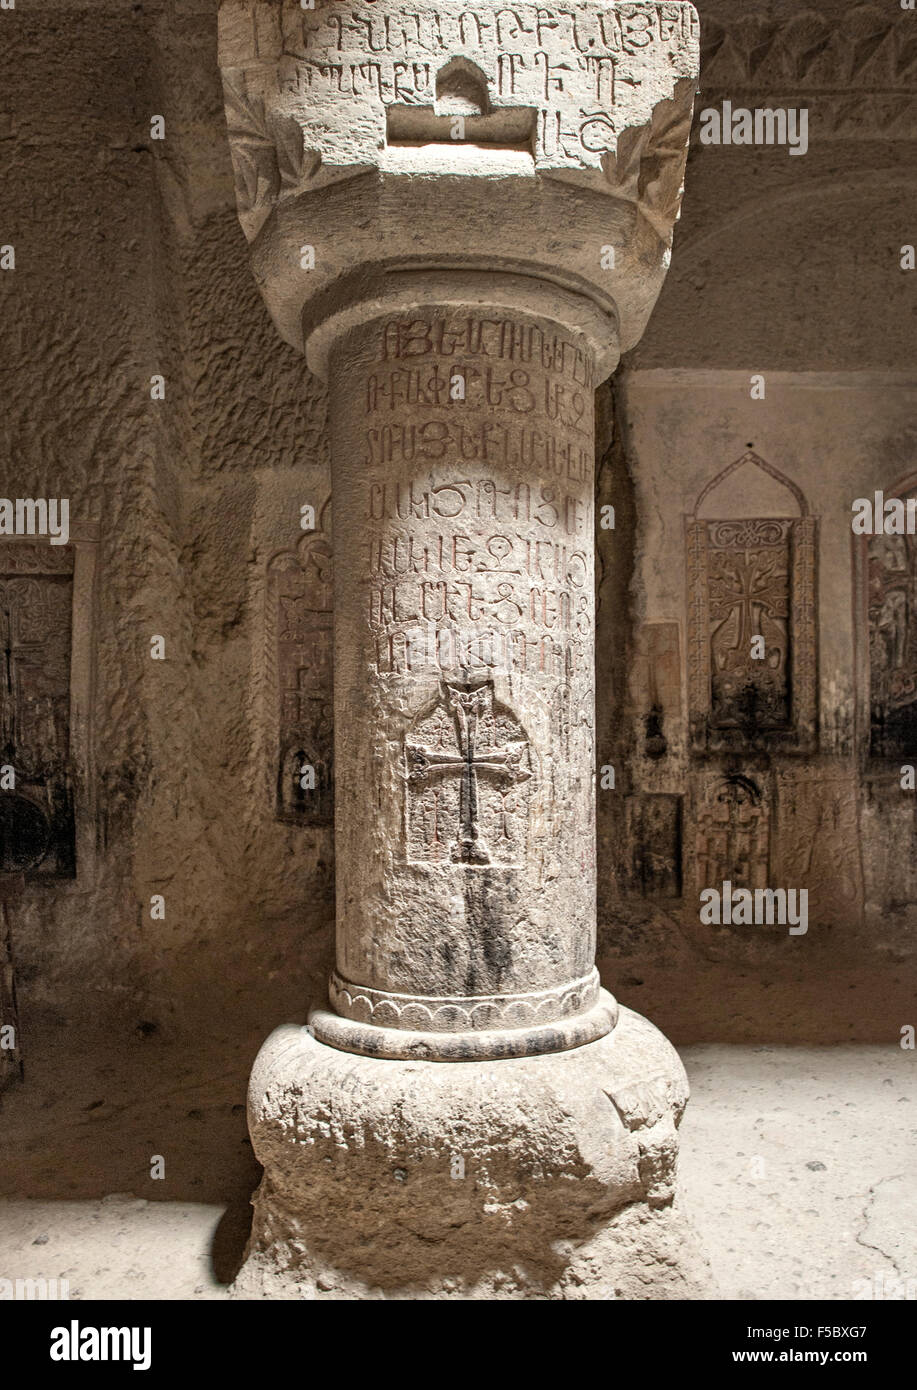 Stone column with carvings in the gavit of the Geghard monastery in Armenia. Stock Photo